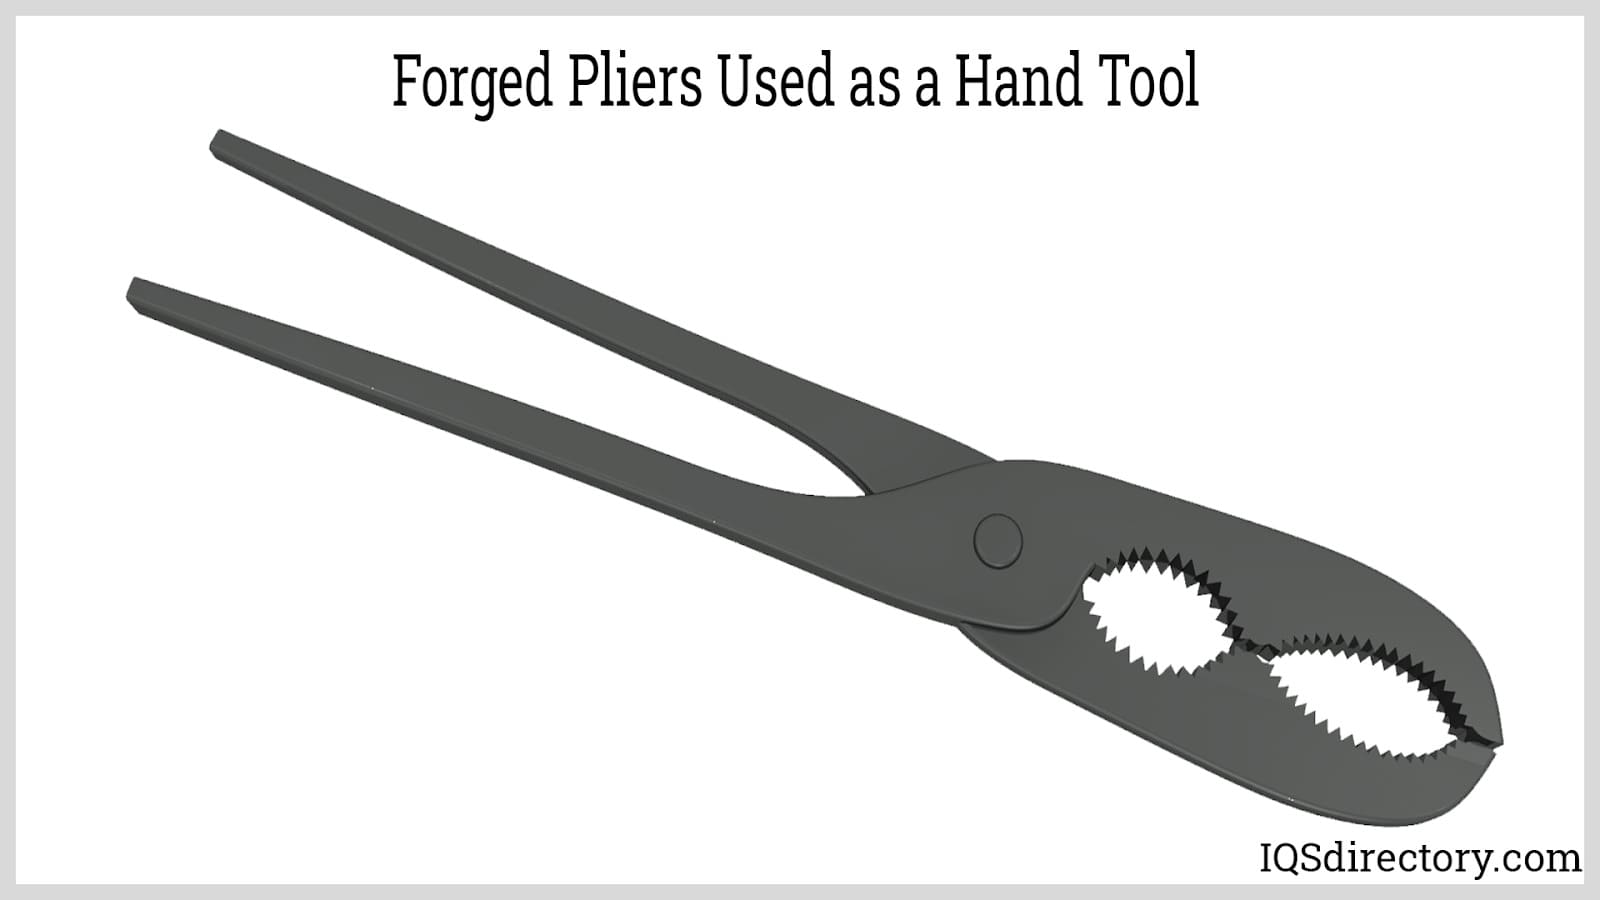 Forged Pliers Used as a Hand Tool